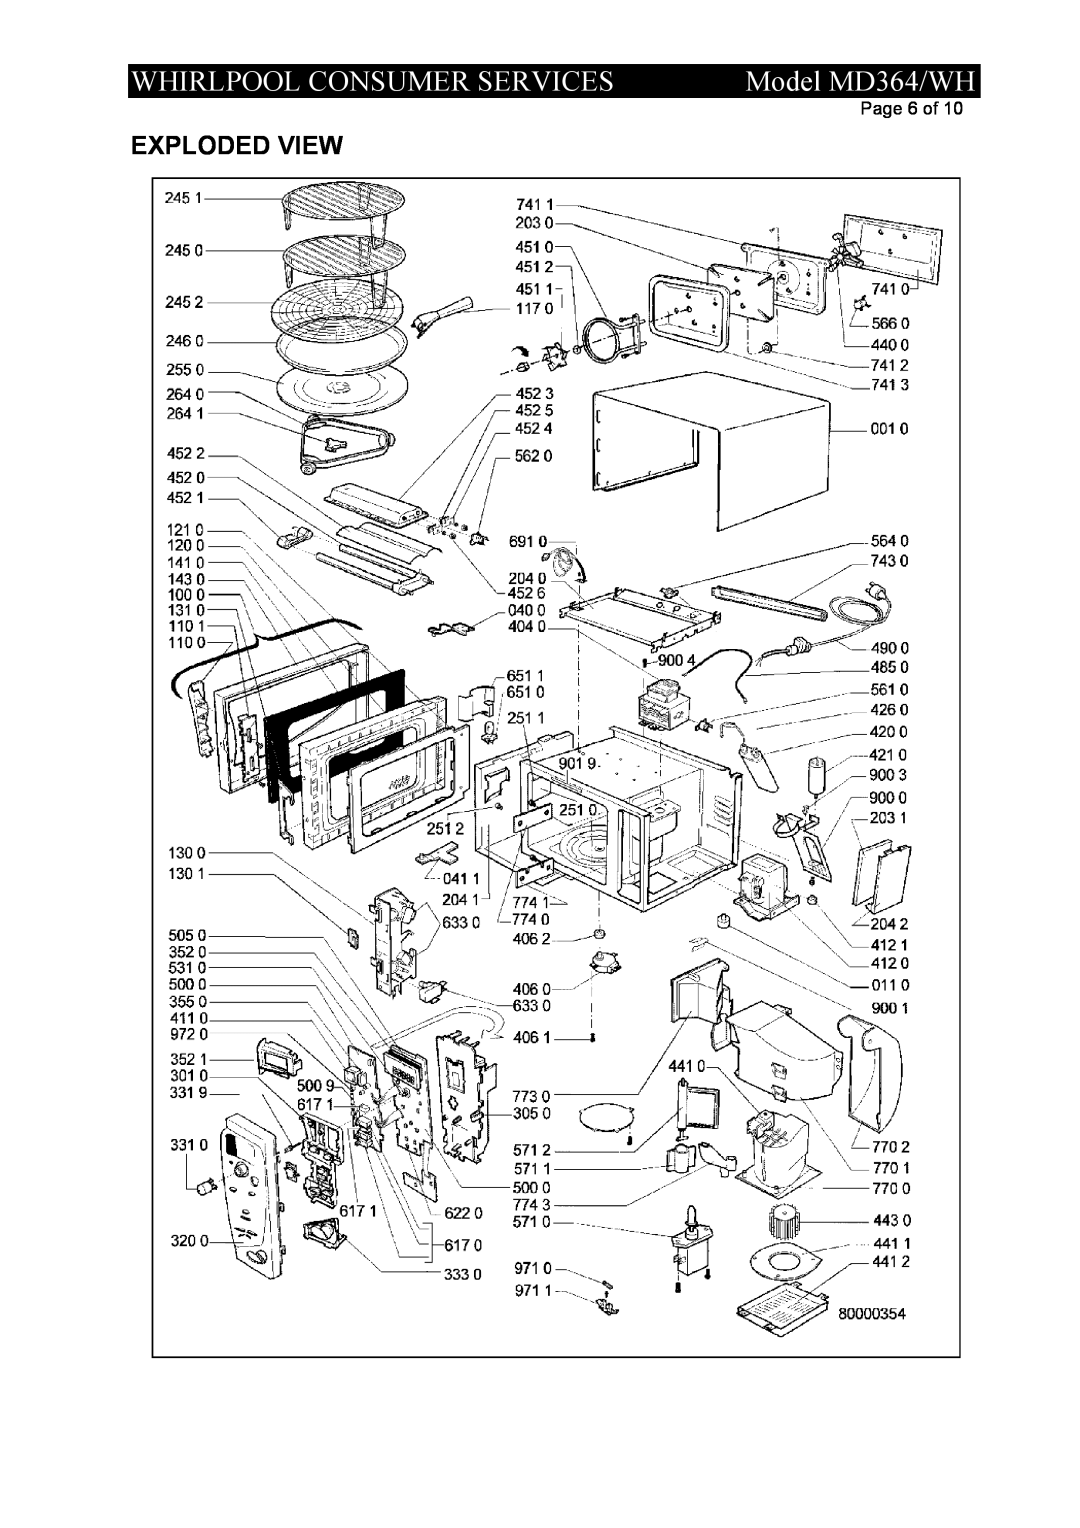 Whirlpool service manual Exploded View, Whirlpool Consumer Services, Model MD364/WH, Page 6 of 